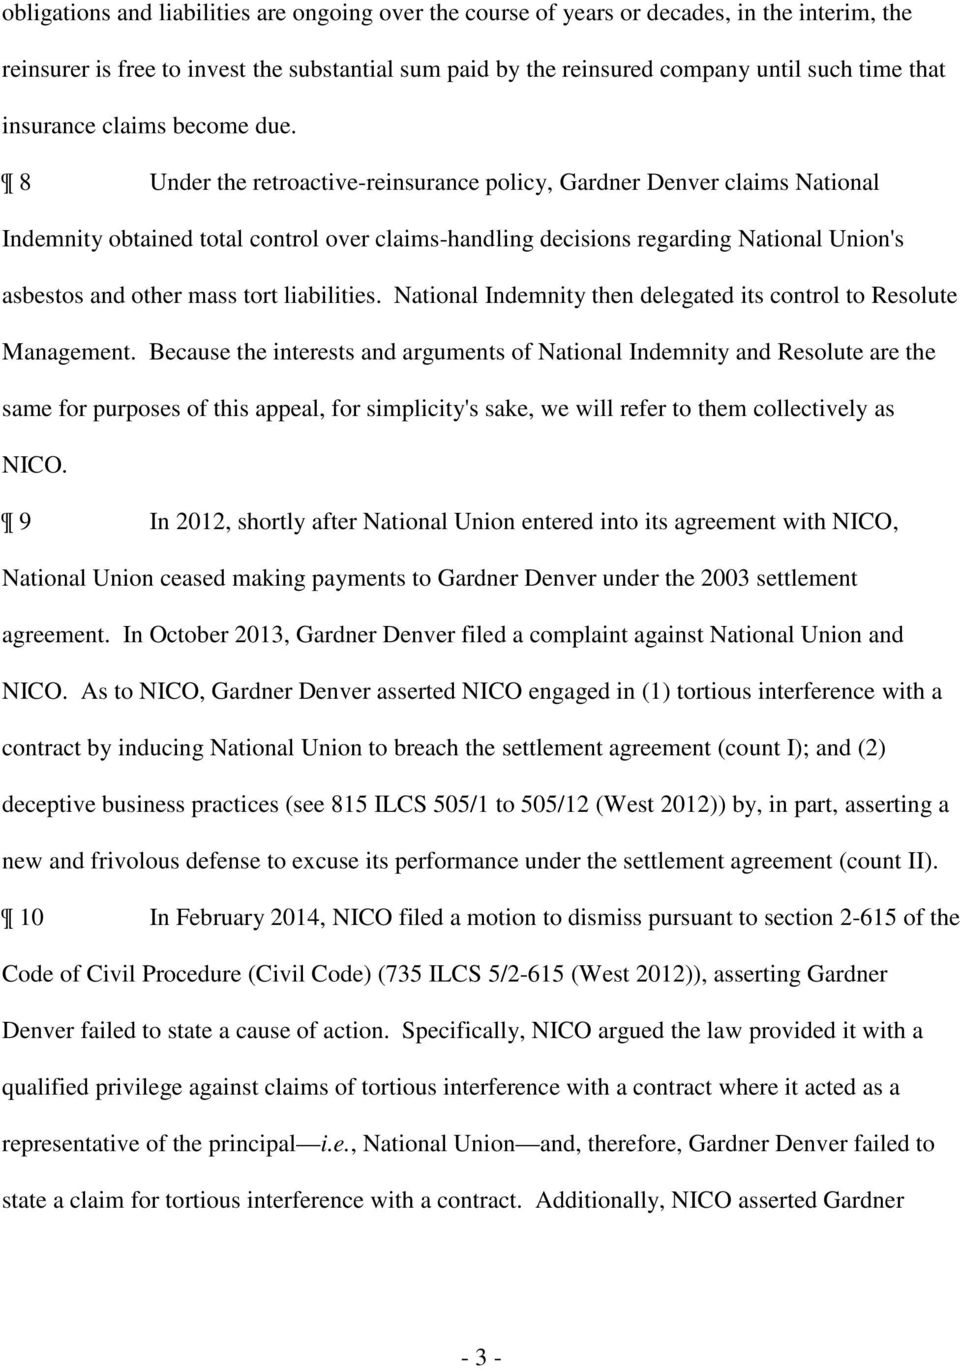 8 Under the retroactive-reinsurance policy, Gardner Denver claims National Indemnity obtained total control over claims-handling decisions regarding National Union's asbestos and other mass tort